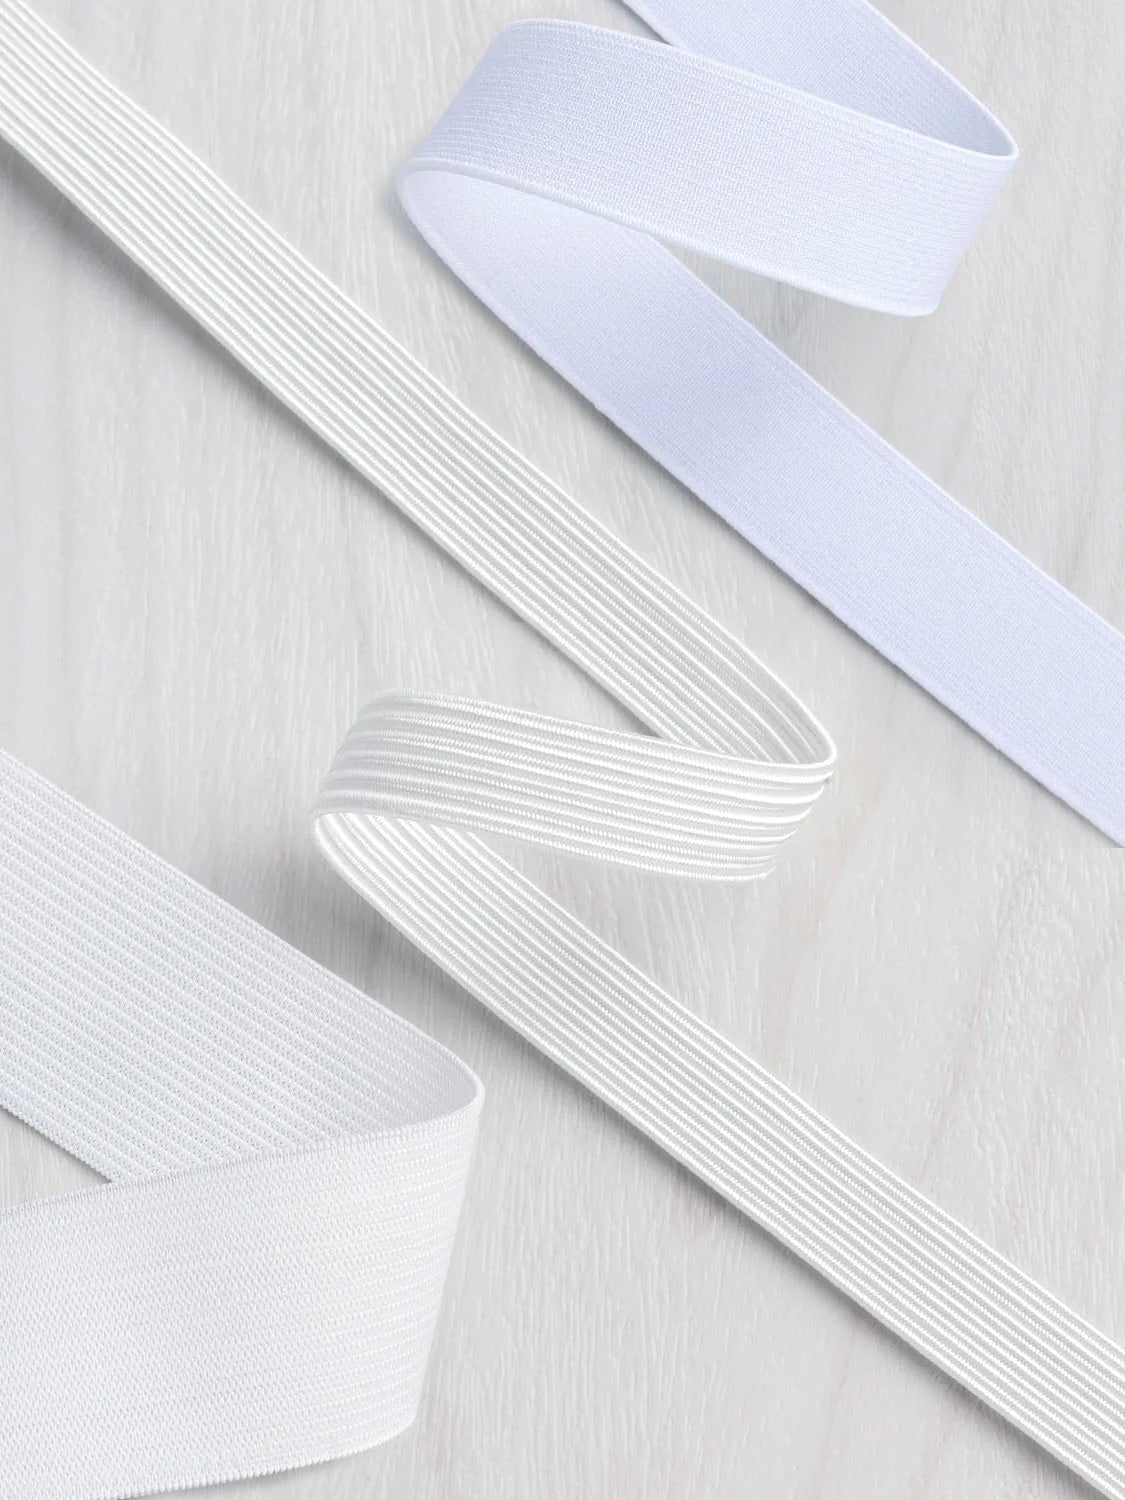 All About Sewing Elastics: Choose The Perfect Sewing Elastic For Your Project